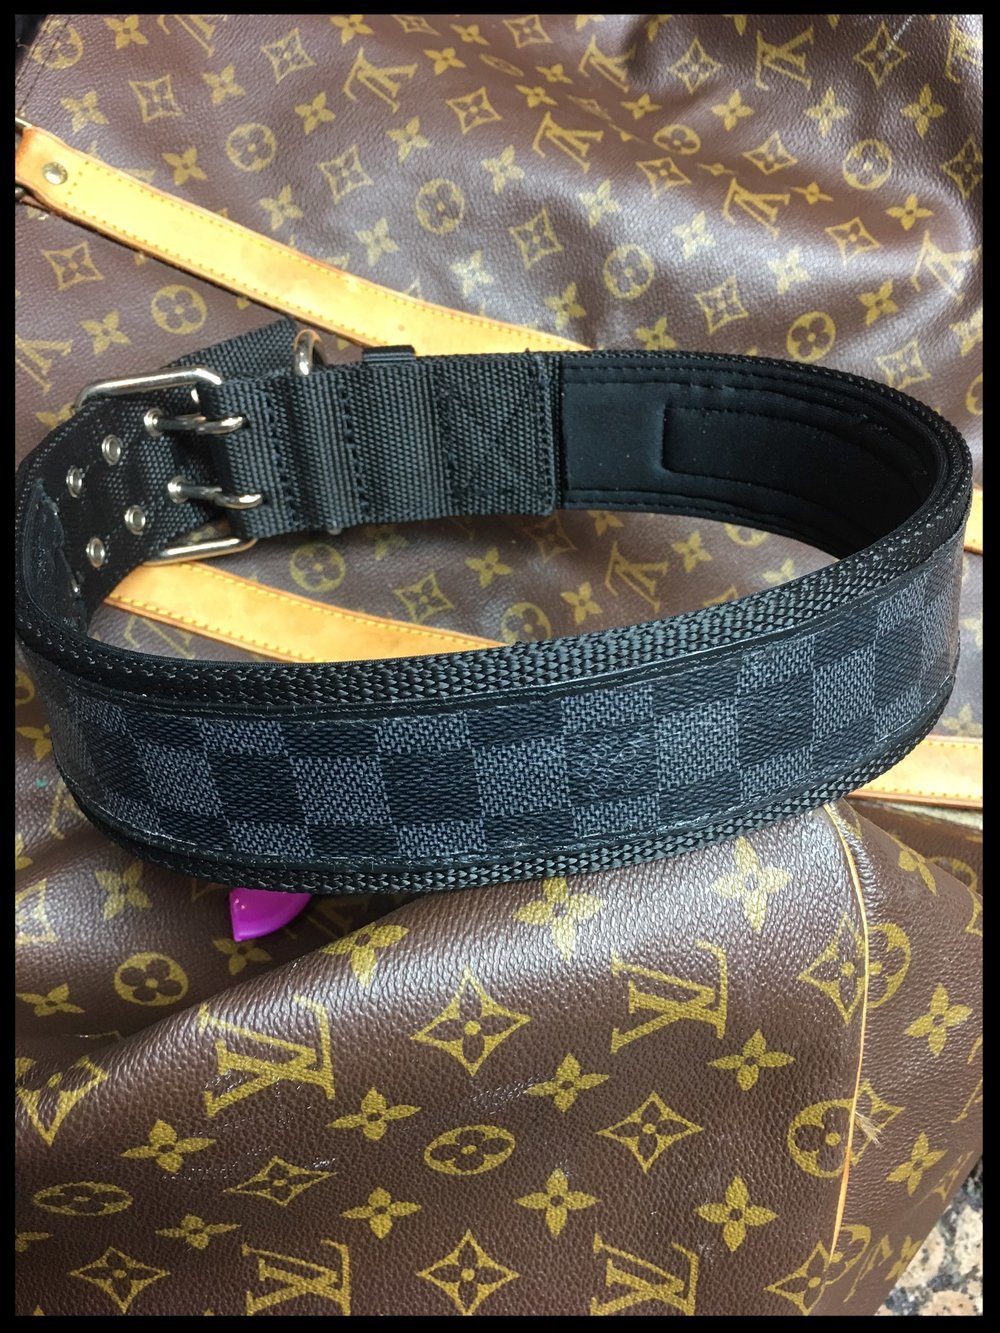 Louie - Engraved Leather Dog Collar